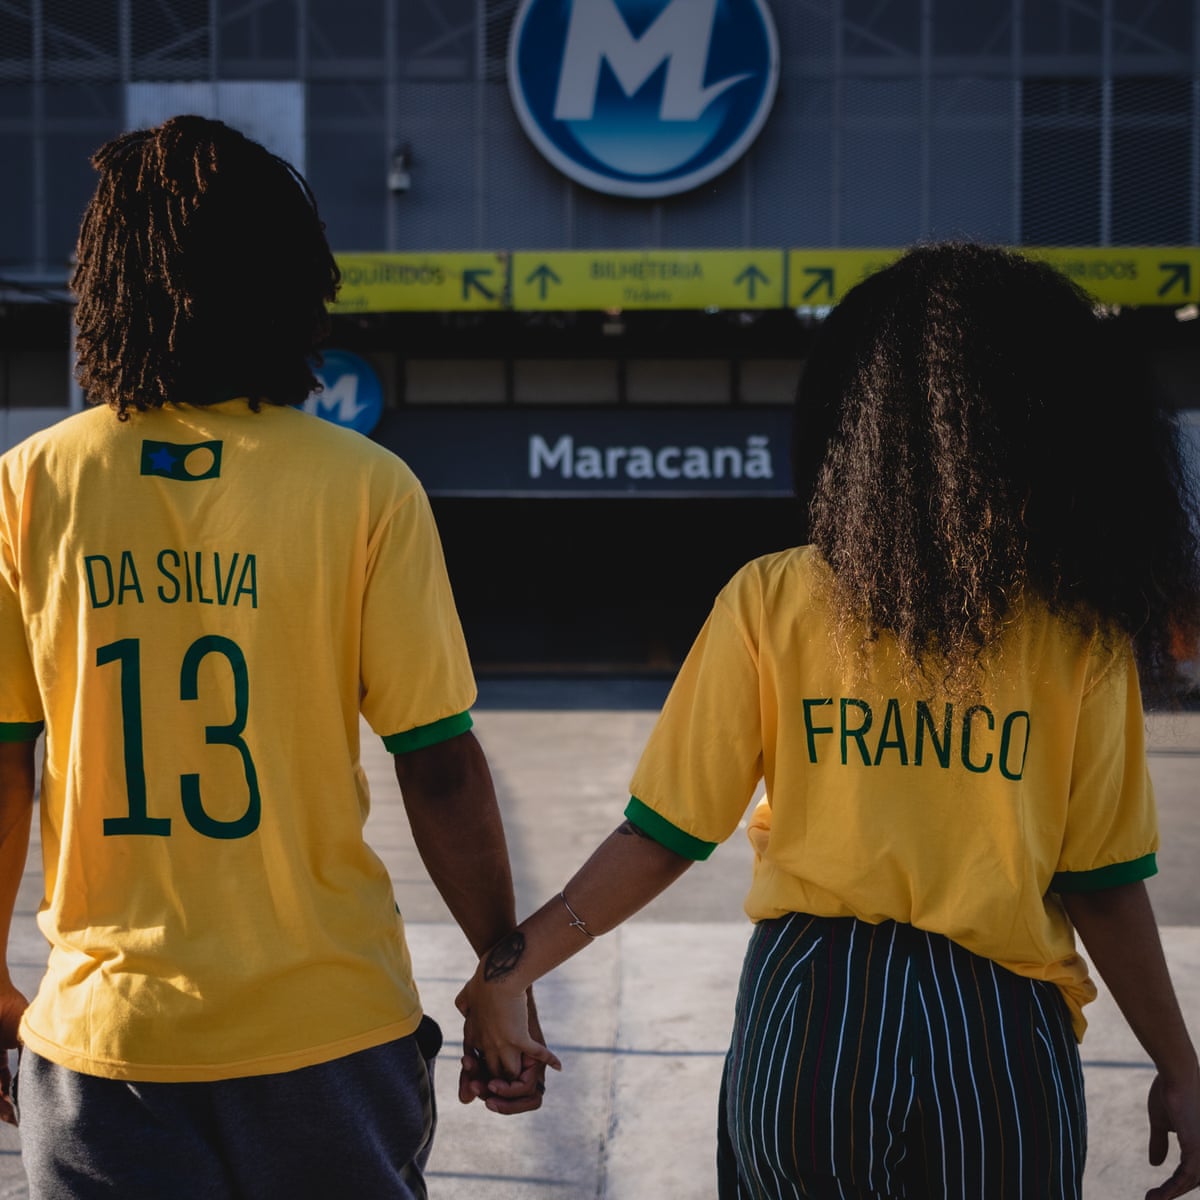 World Cup gives Brazil fans chance to reclaim yellow jersey from